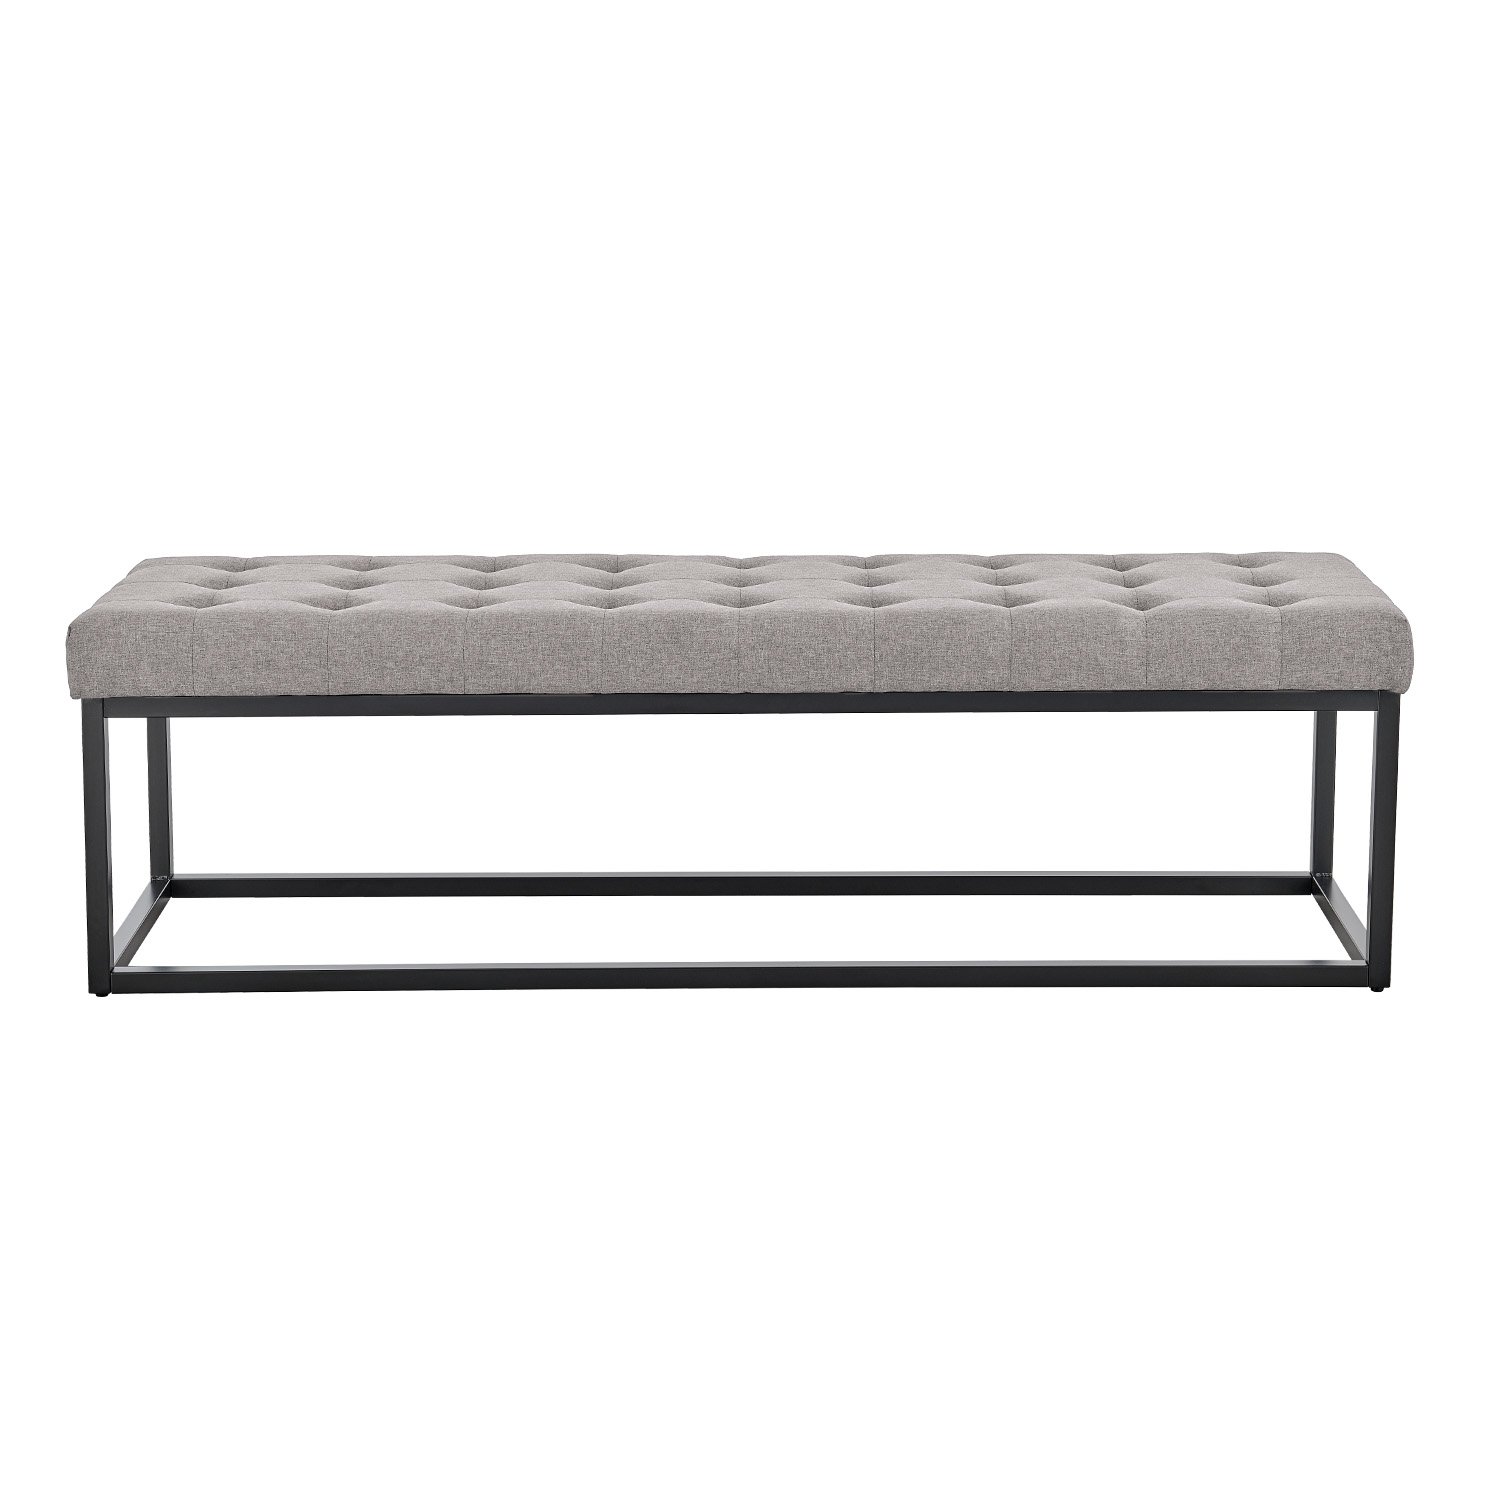 Cameron Button-Tufted Upholstered Bench with Metal Legs - Light Grey 2